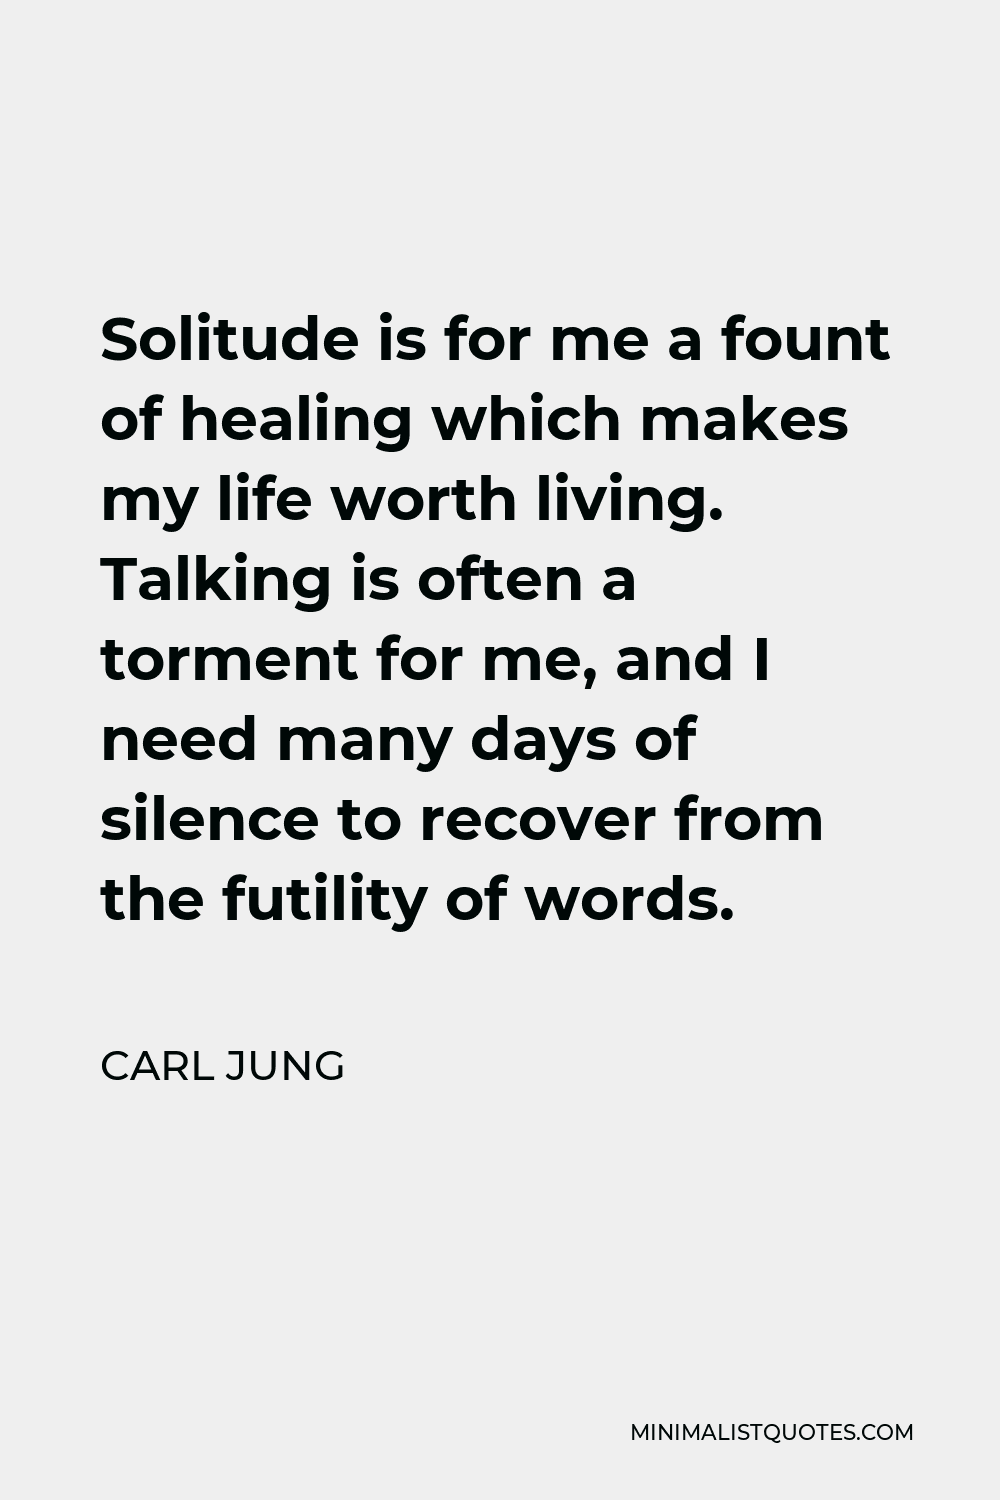 Carl Jung Quote - Solitude is for me a fount of healing which makes my life worth living. Talking is often a torment for me, and I need many days of silence to recover from the futility of words.